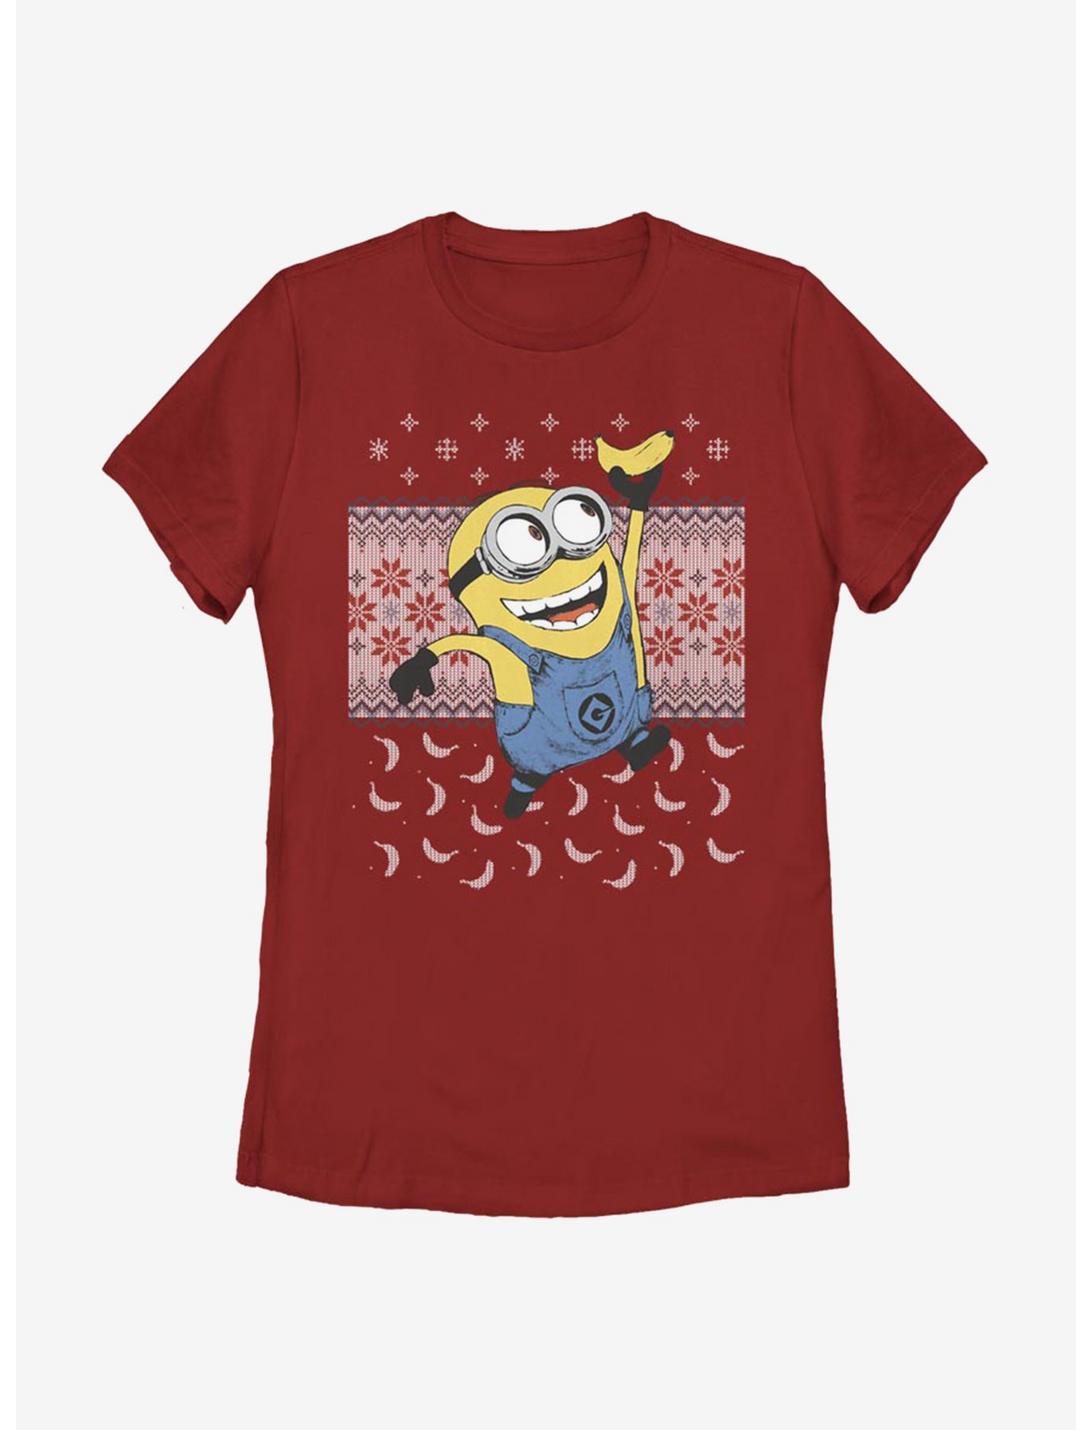 Plus Size Despicable Me Minions Banana Christmas Pattern Womens T-Shirt, RED, hi-res